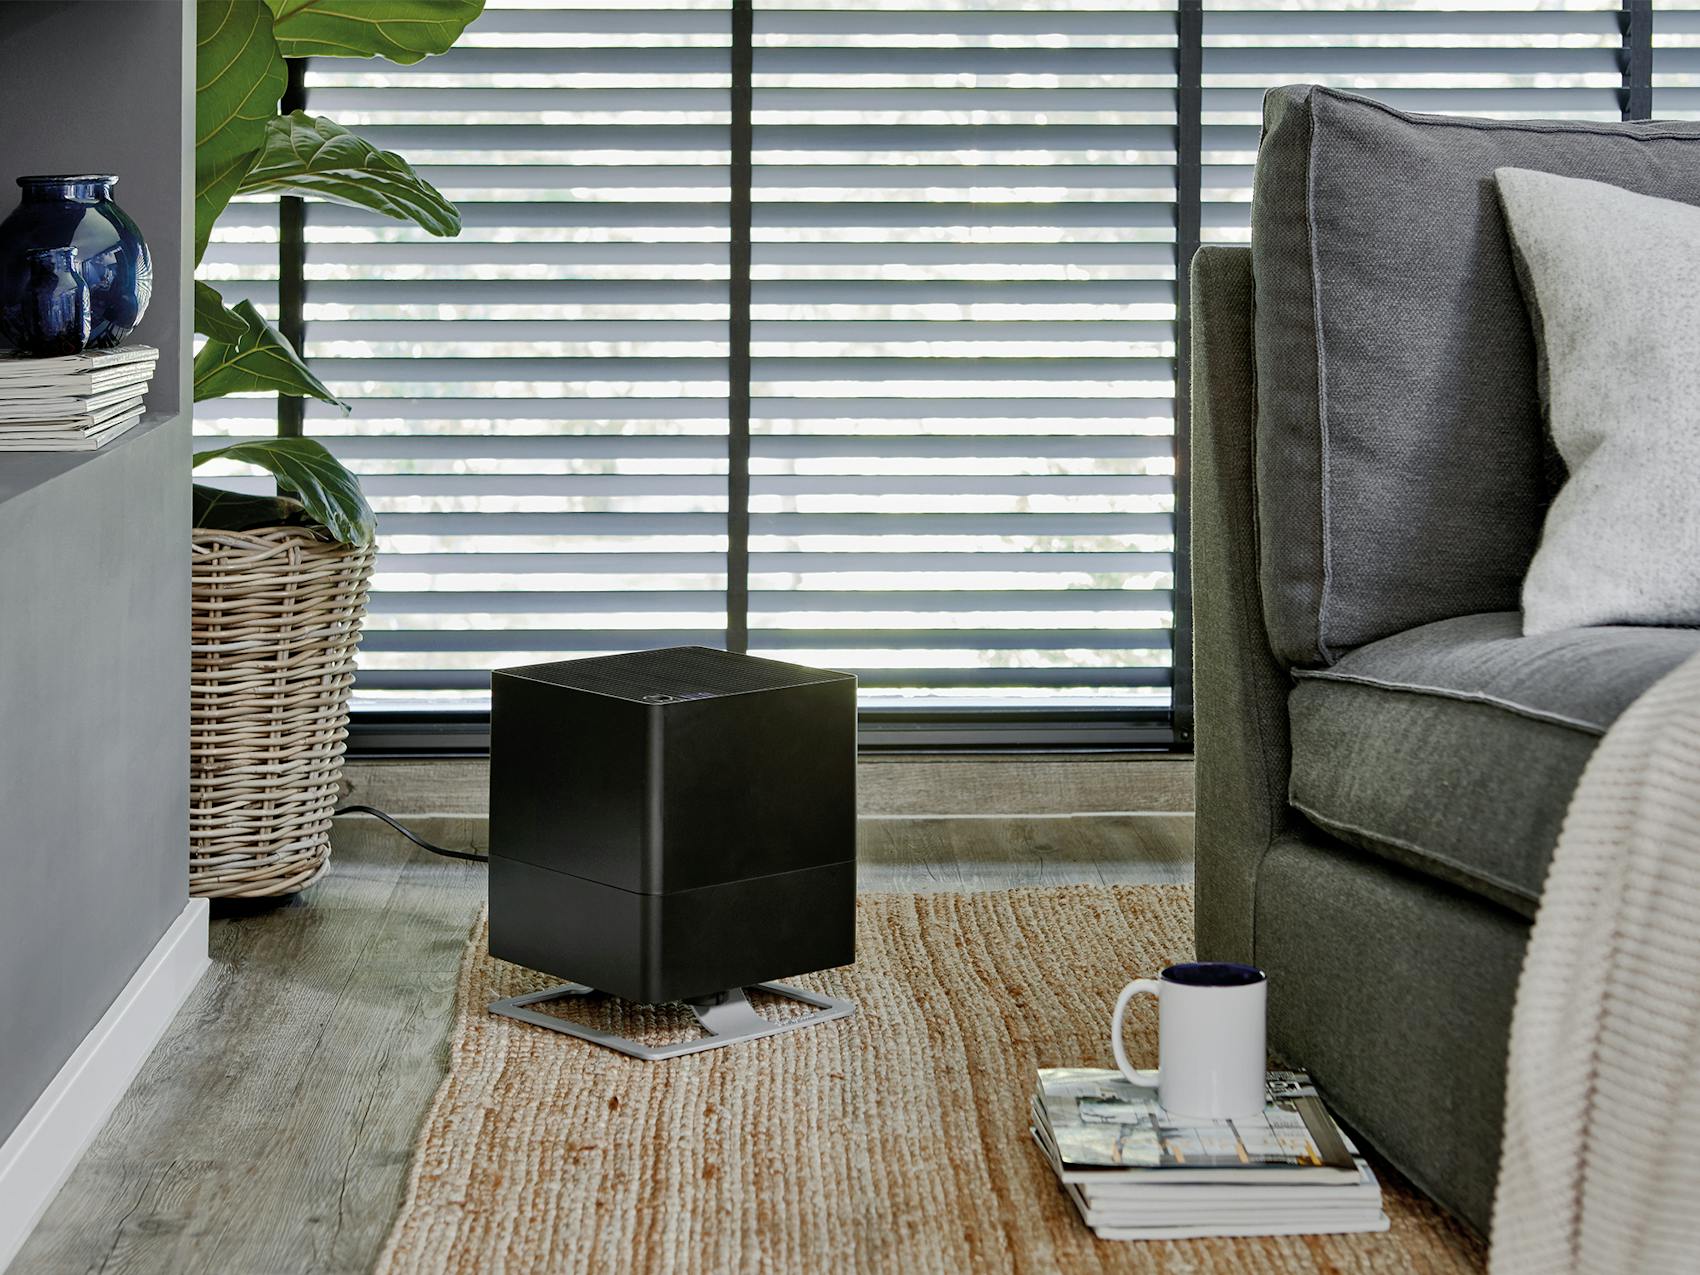 Oskar humidifier by Stadler Form in black next to a couch